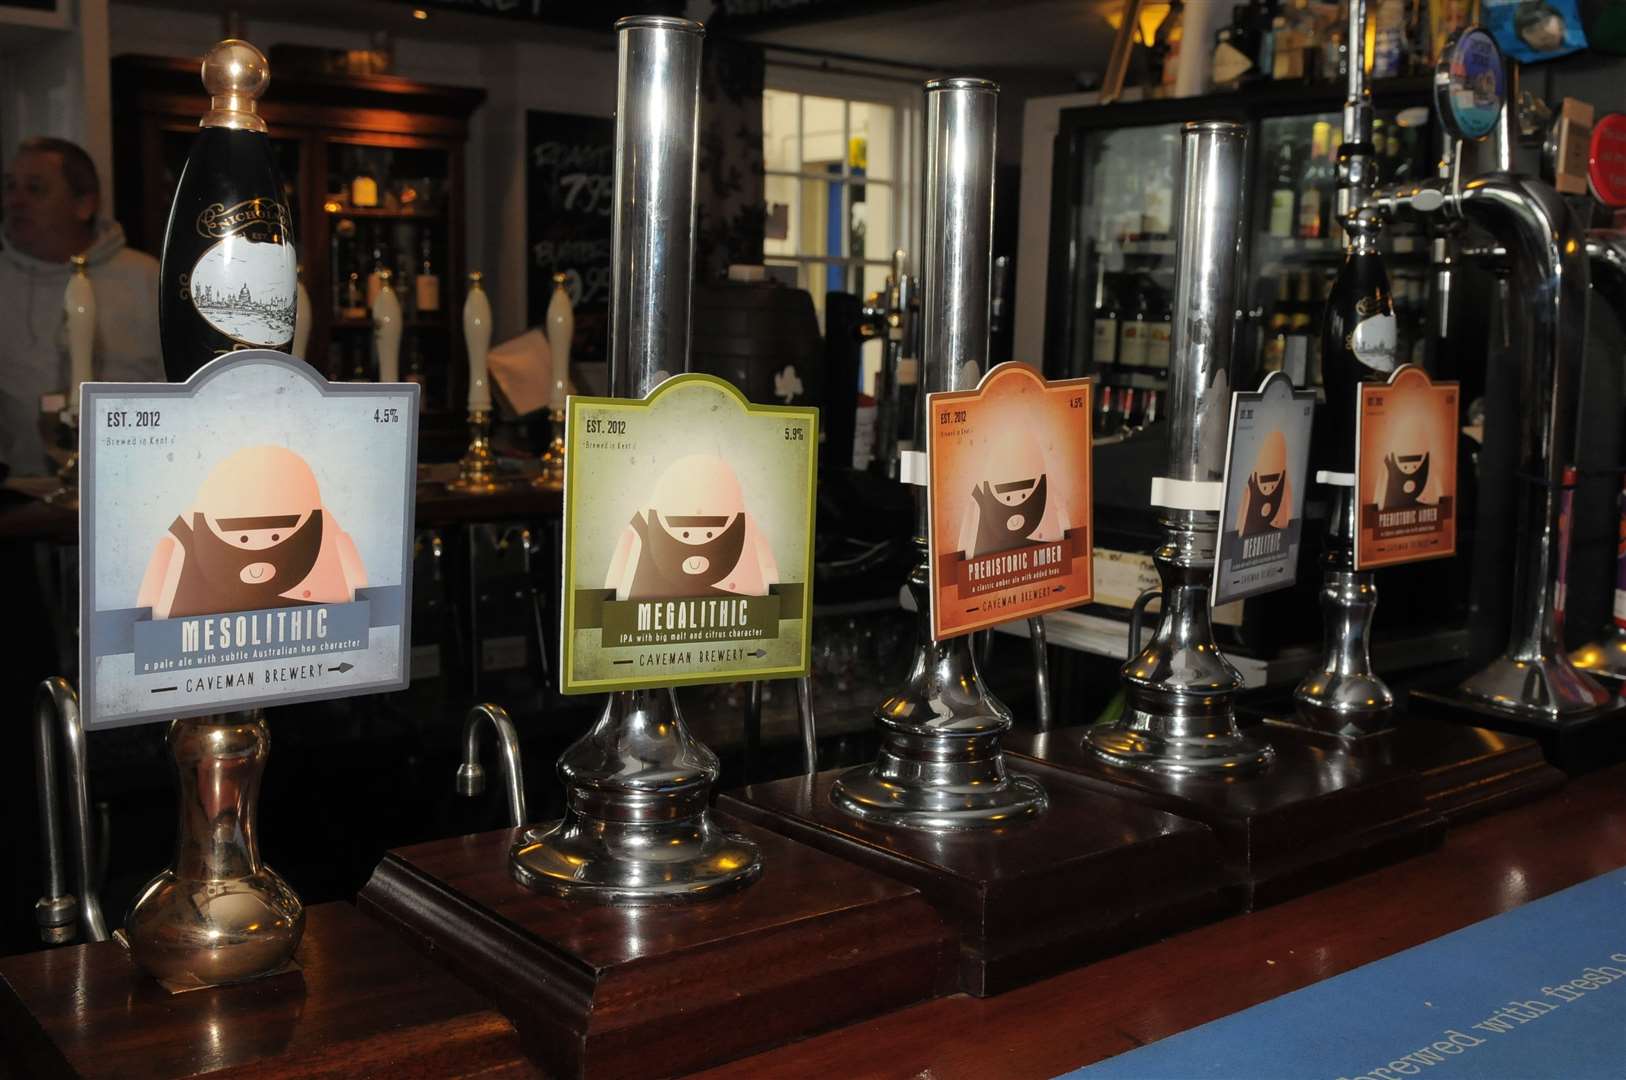 Caveman Brewery beers at the The George and Dragon Pub in Swanscombe